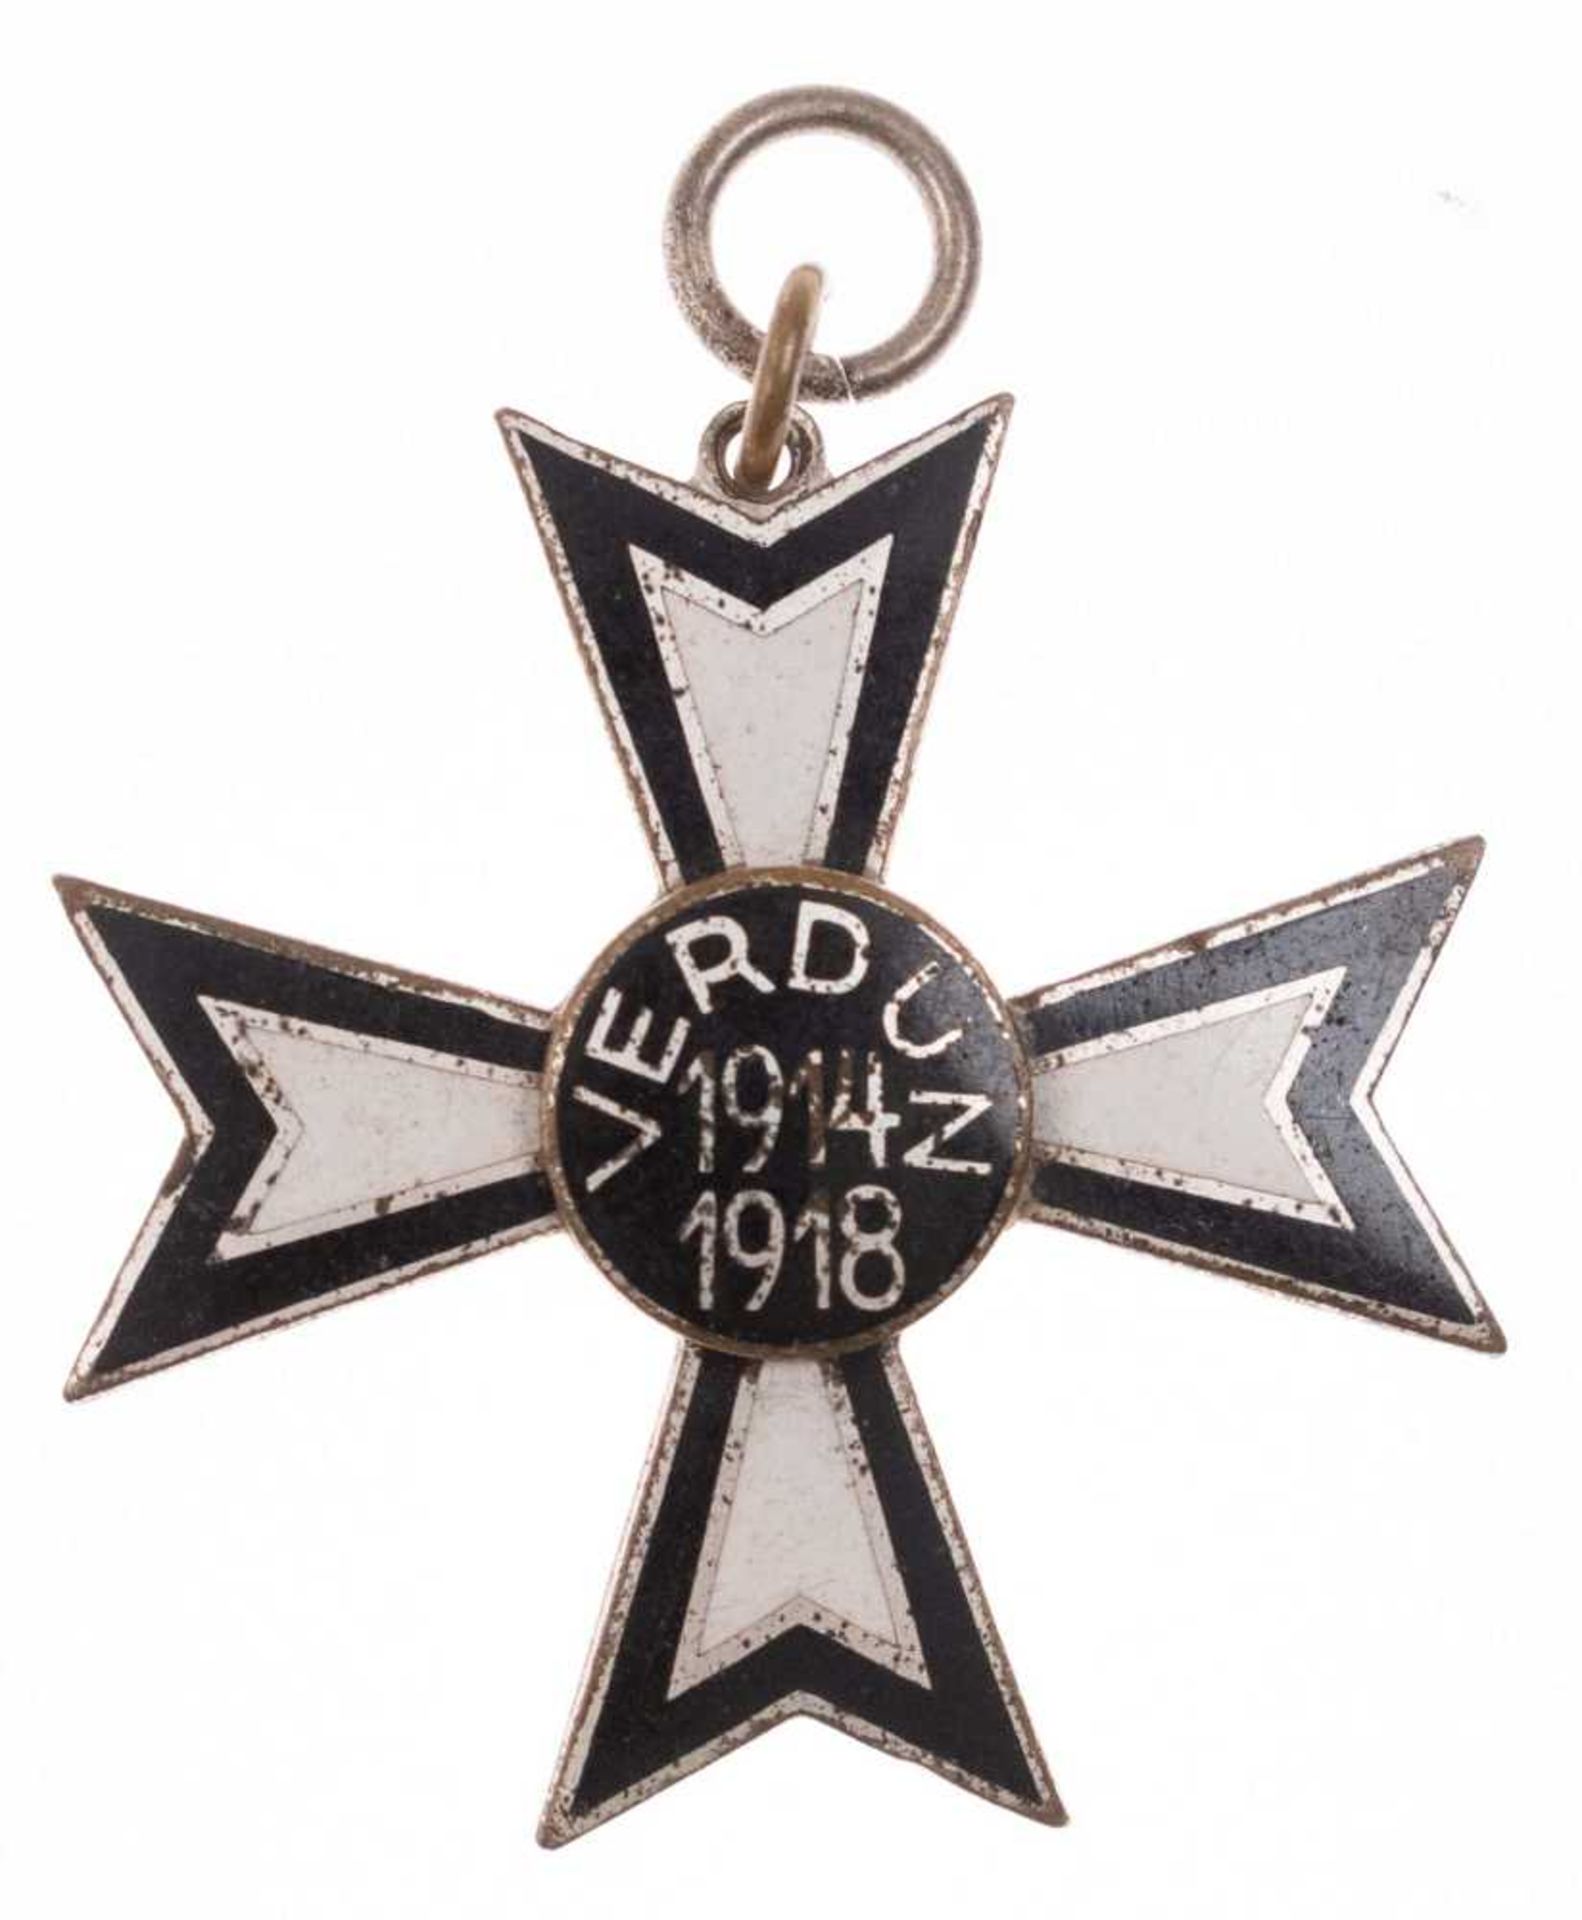 Verdun cross 1914-1918, non-ferrous metal, silver-plated, enameled, on the reverse side with punched